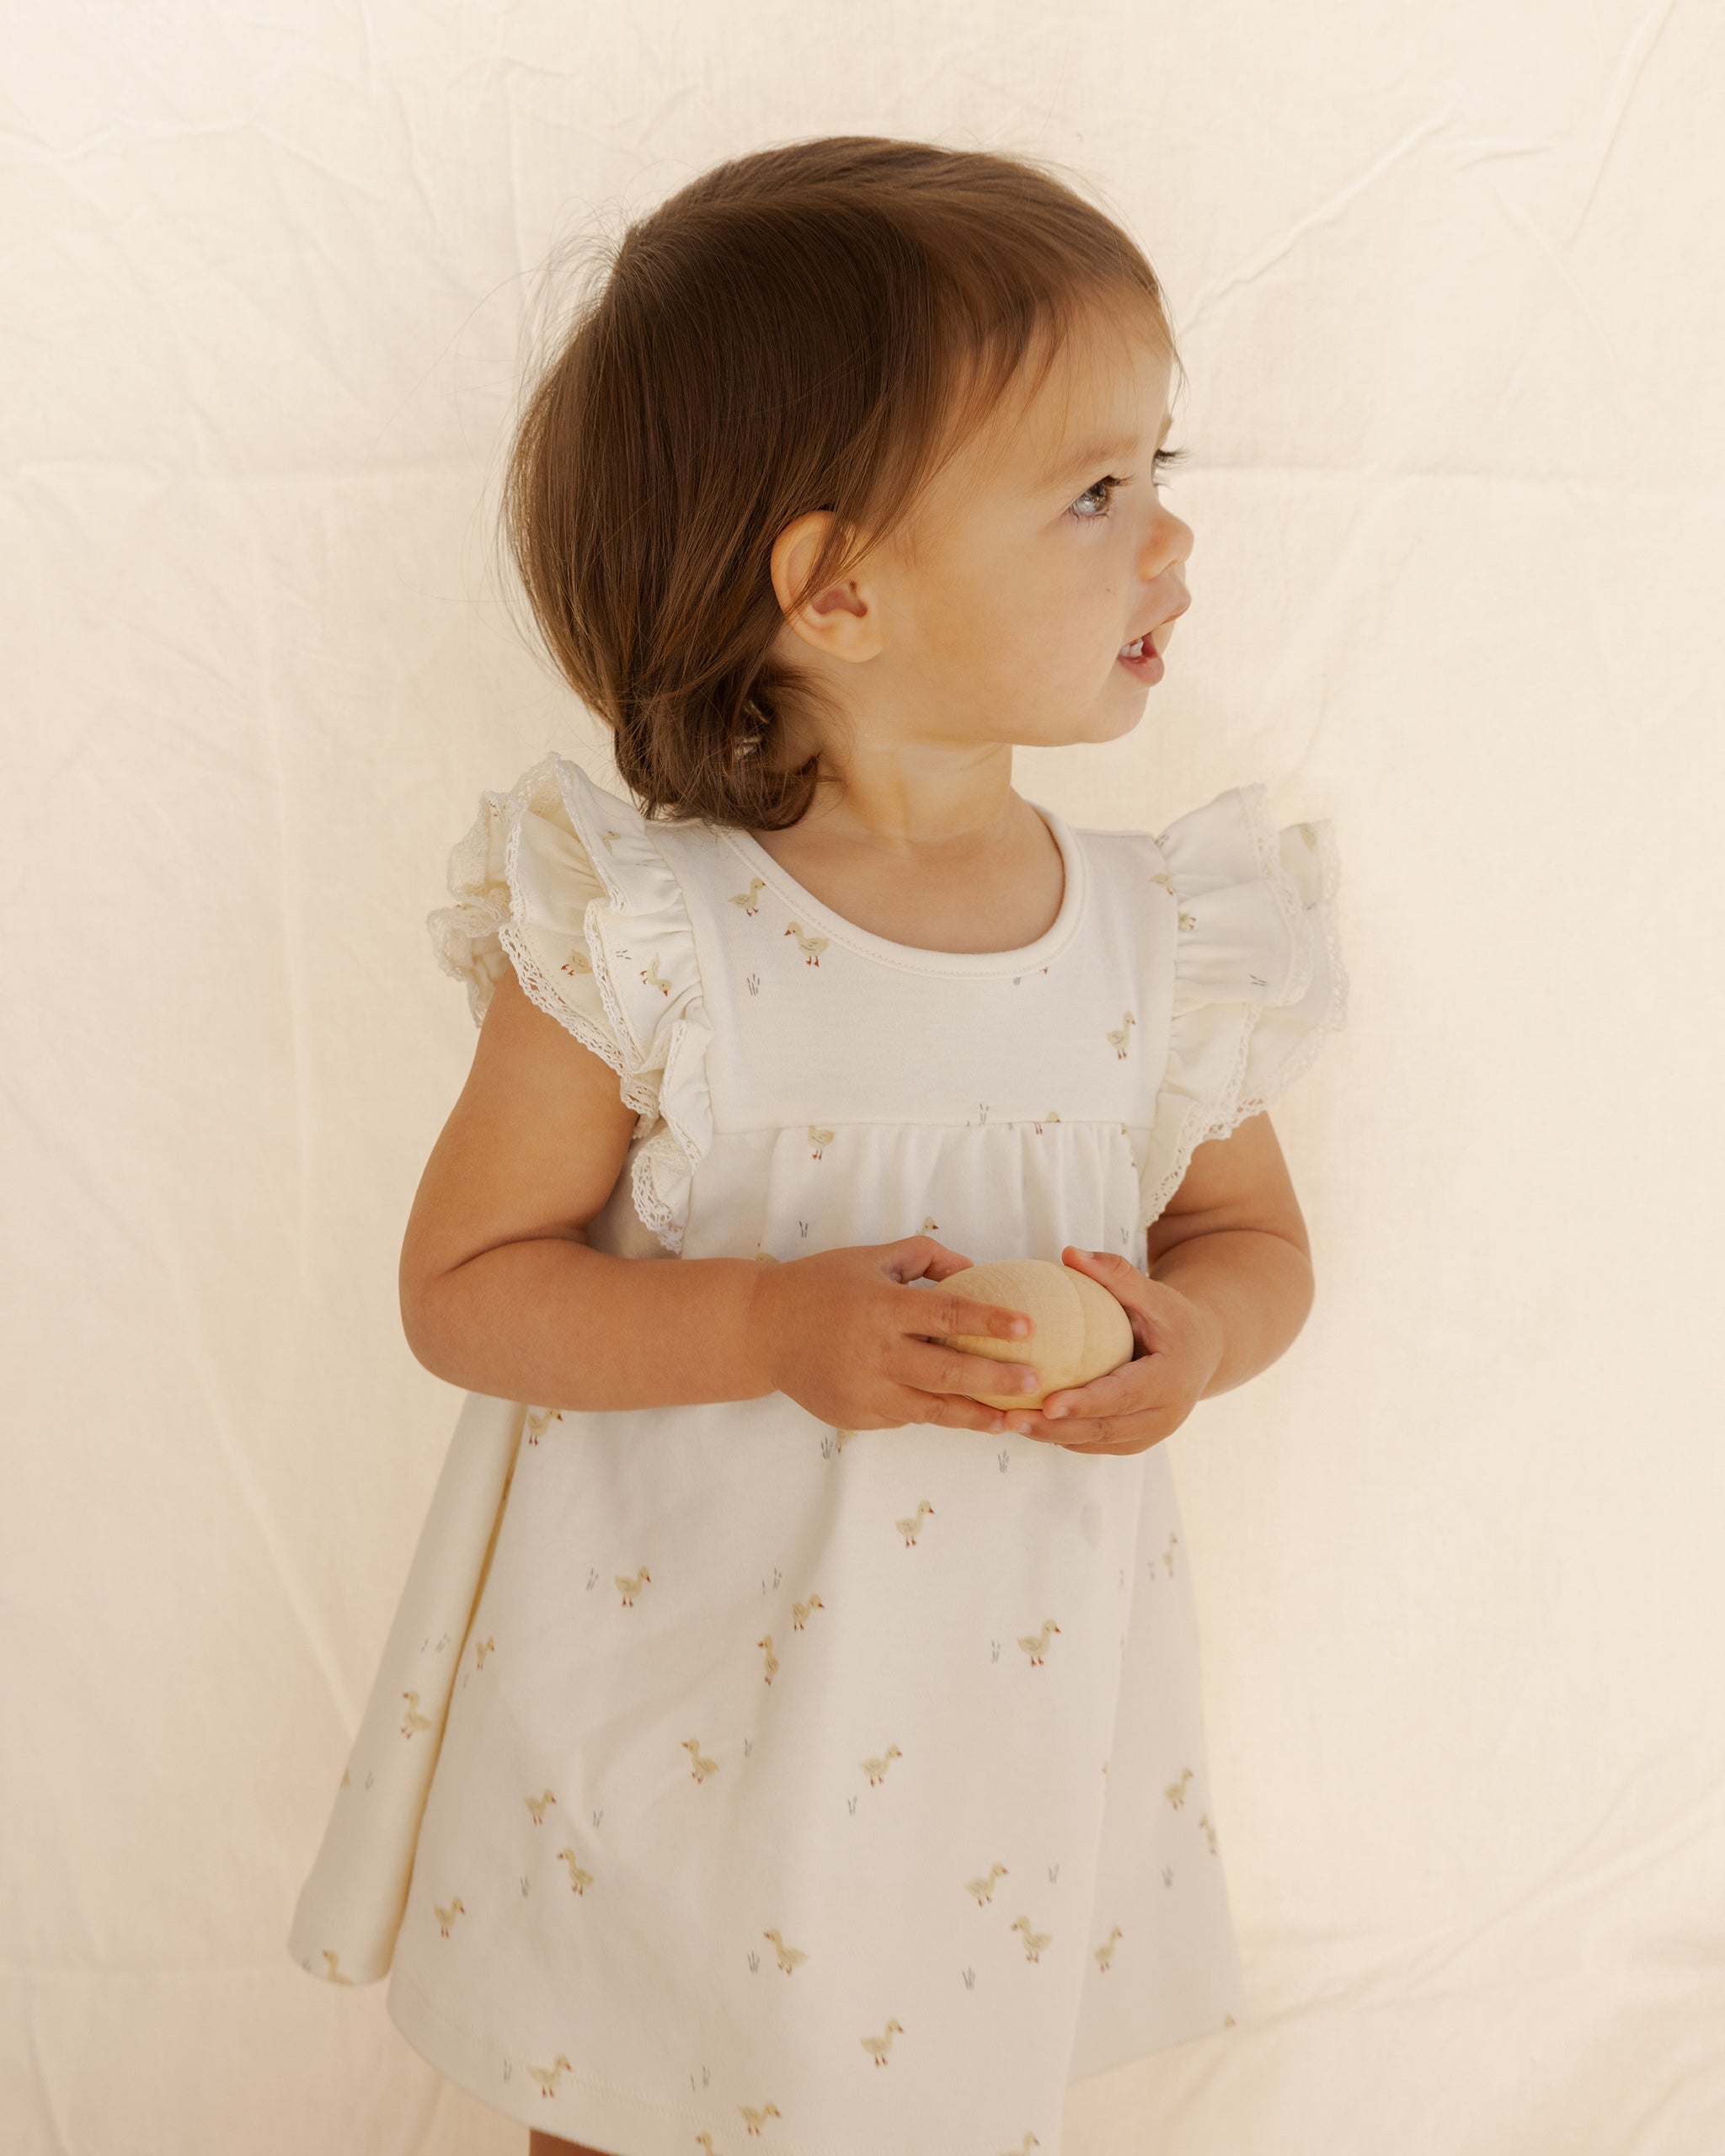 Flutter Dress || Ducks - Rylee + Cru | Kids Clothes | Trendy Baby Clothes | Modern Infant Outfits |